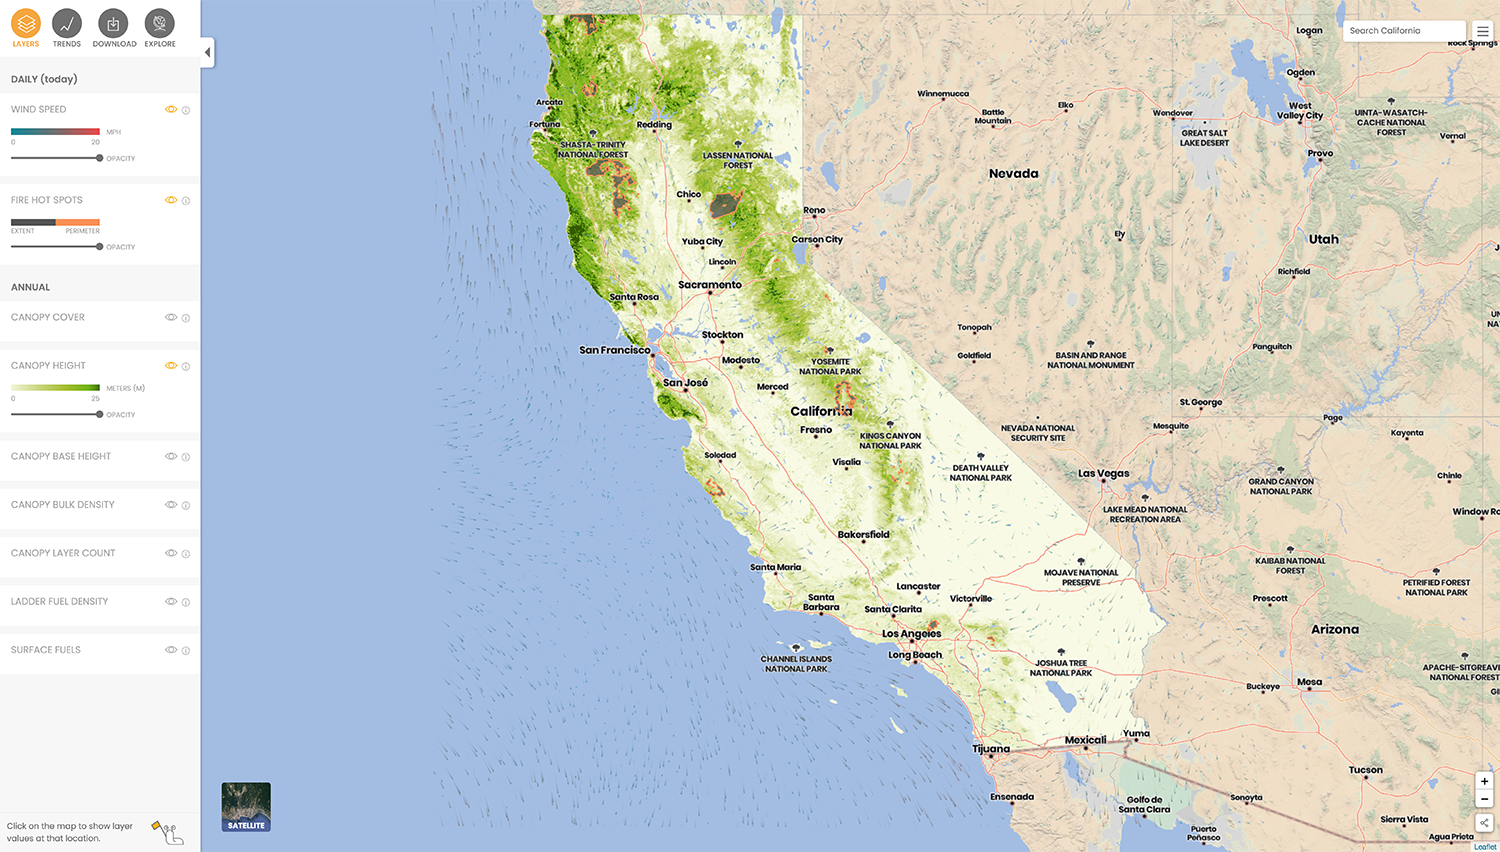 The California Forest Observatory web platform displays vegetation, wildfire, and weather data layers across the entire state, including historical data back to 2016 to visualize trends across space and time. © Salo Sciences, Inc. 2020